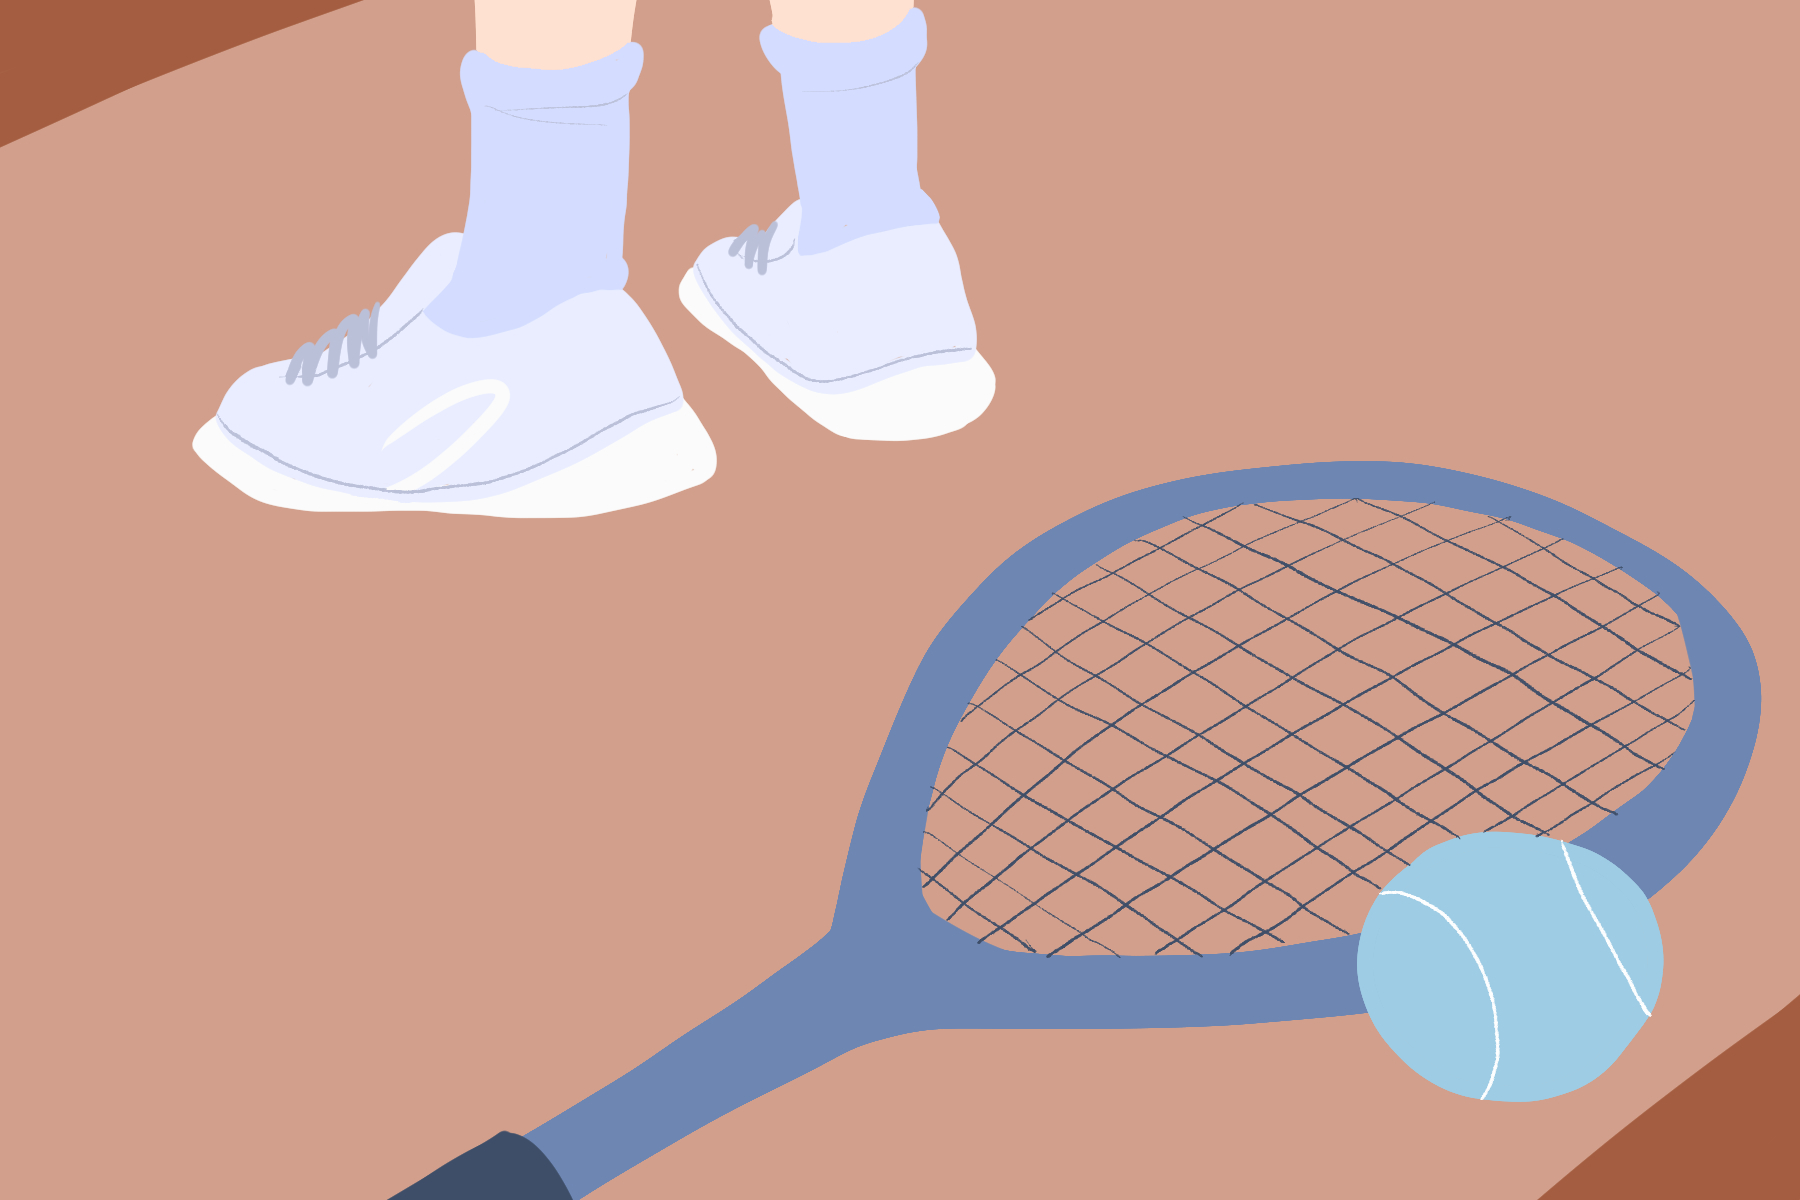 In an article on the ATP Tour, a drawing shows a tennis racket next to a standing player.